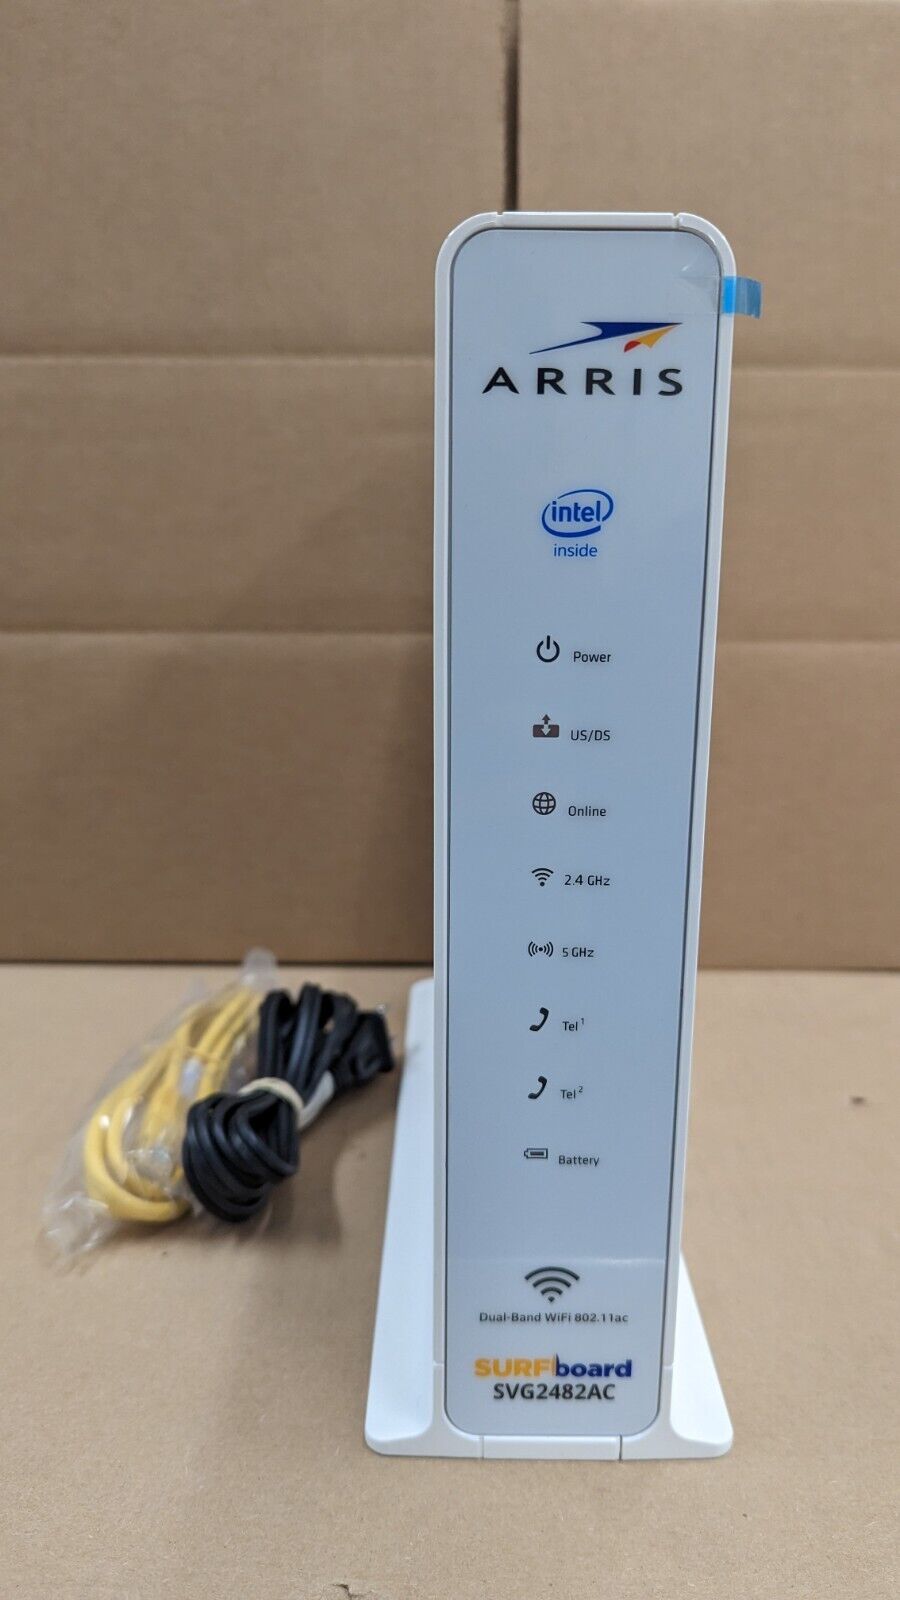 ARRIS SVG2482AC 24 x 8 DOCSIS 3.0 Voice Cable Modem with AC1750 Dual-Band Wi-Fi